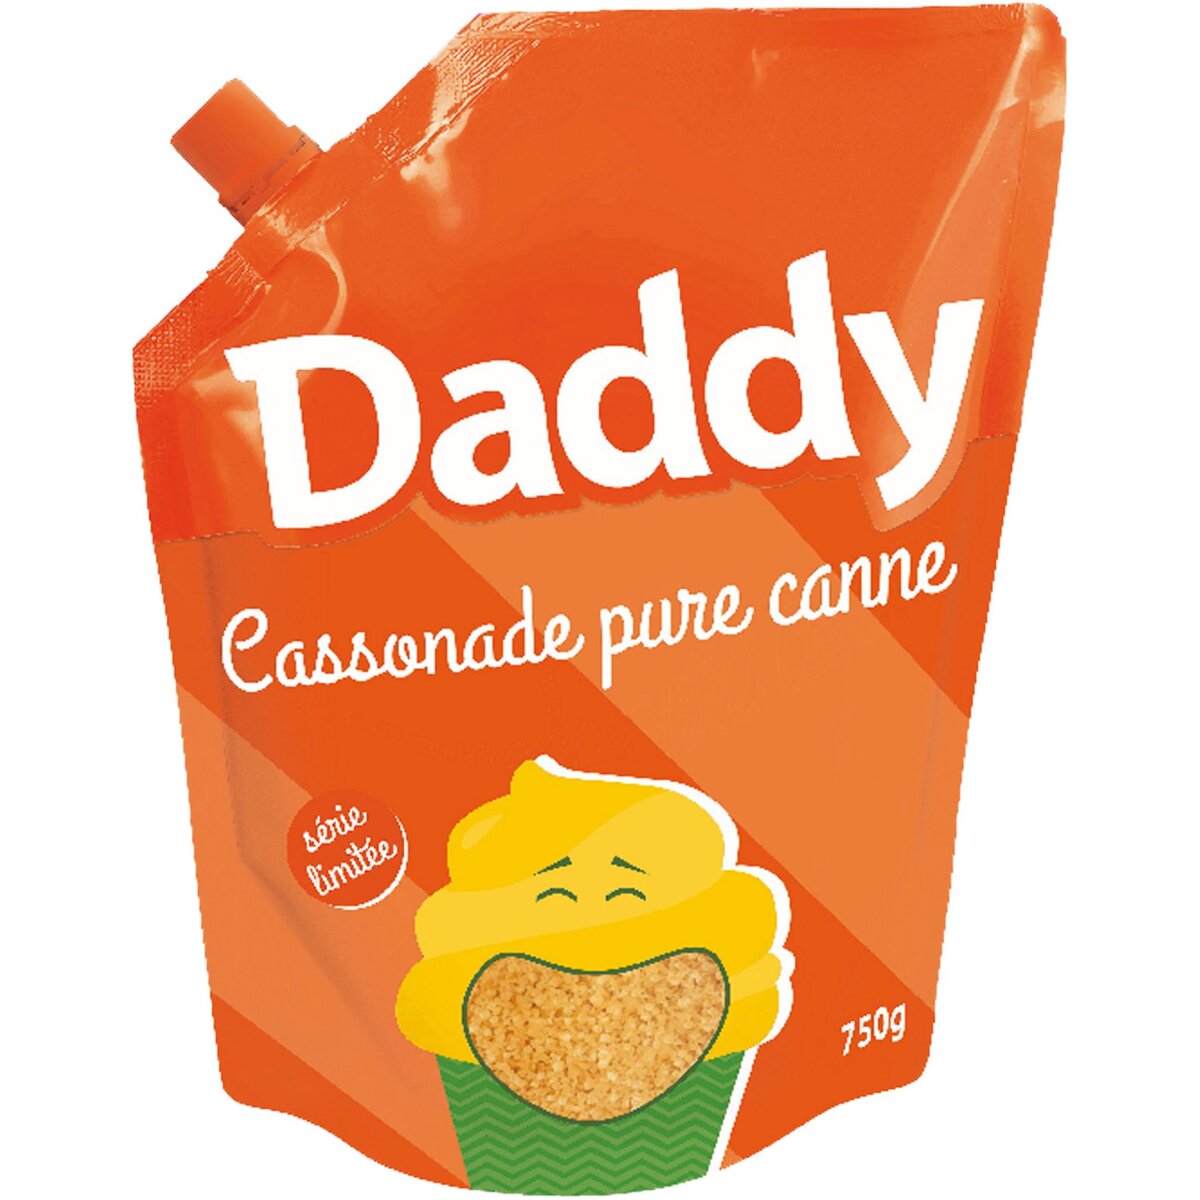 DADDY Cassonnade pure canne en poudre 750g